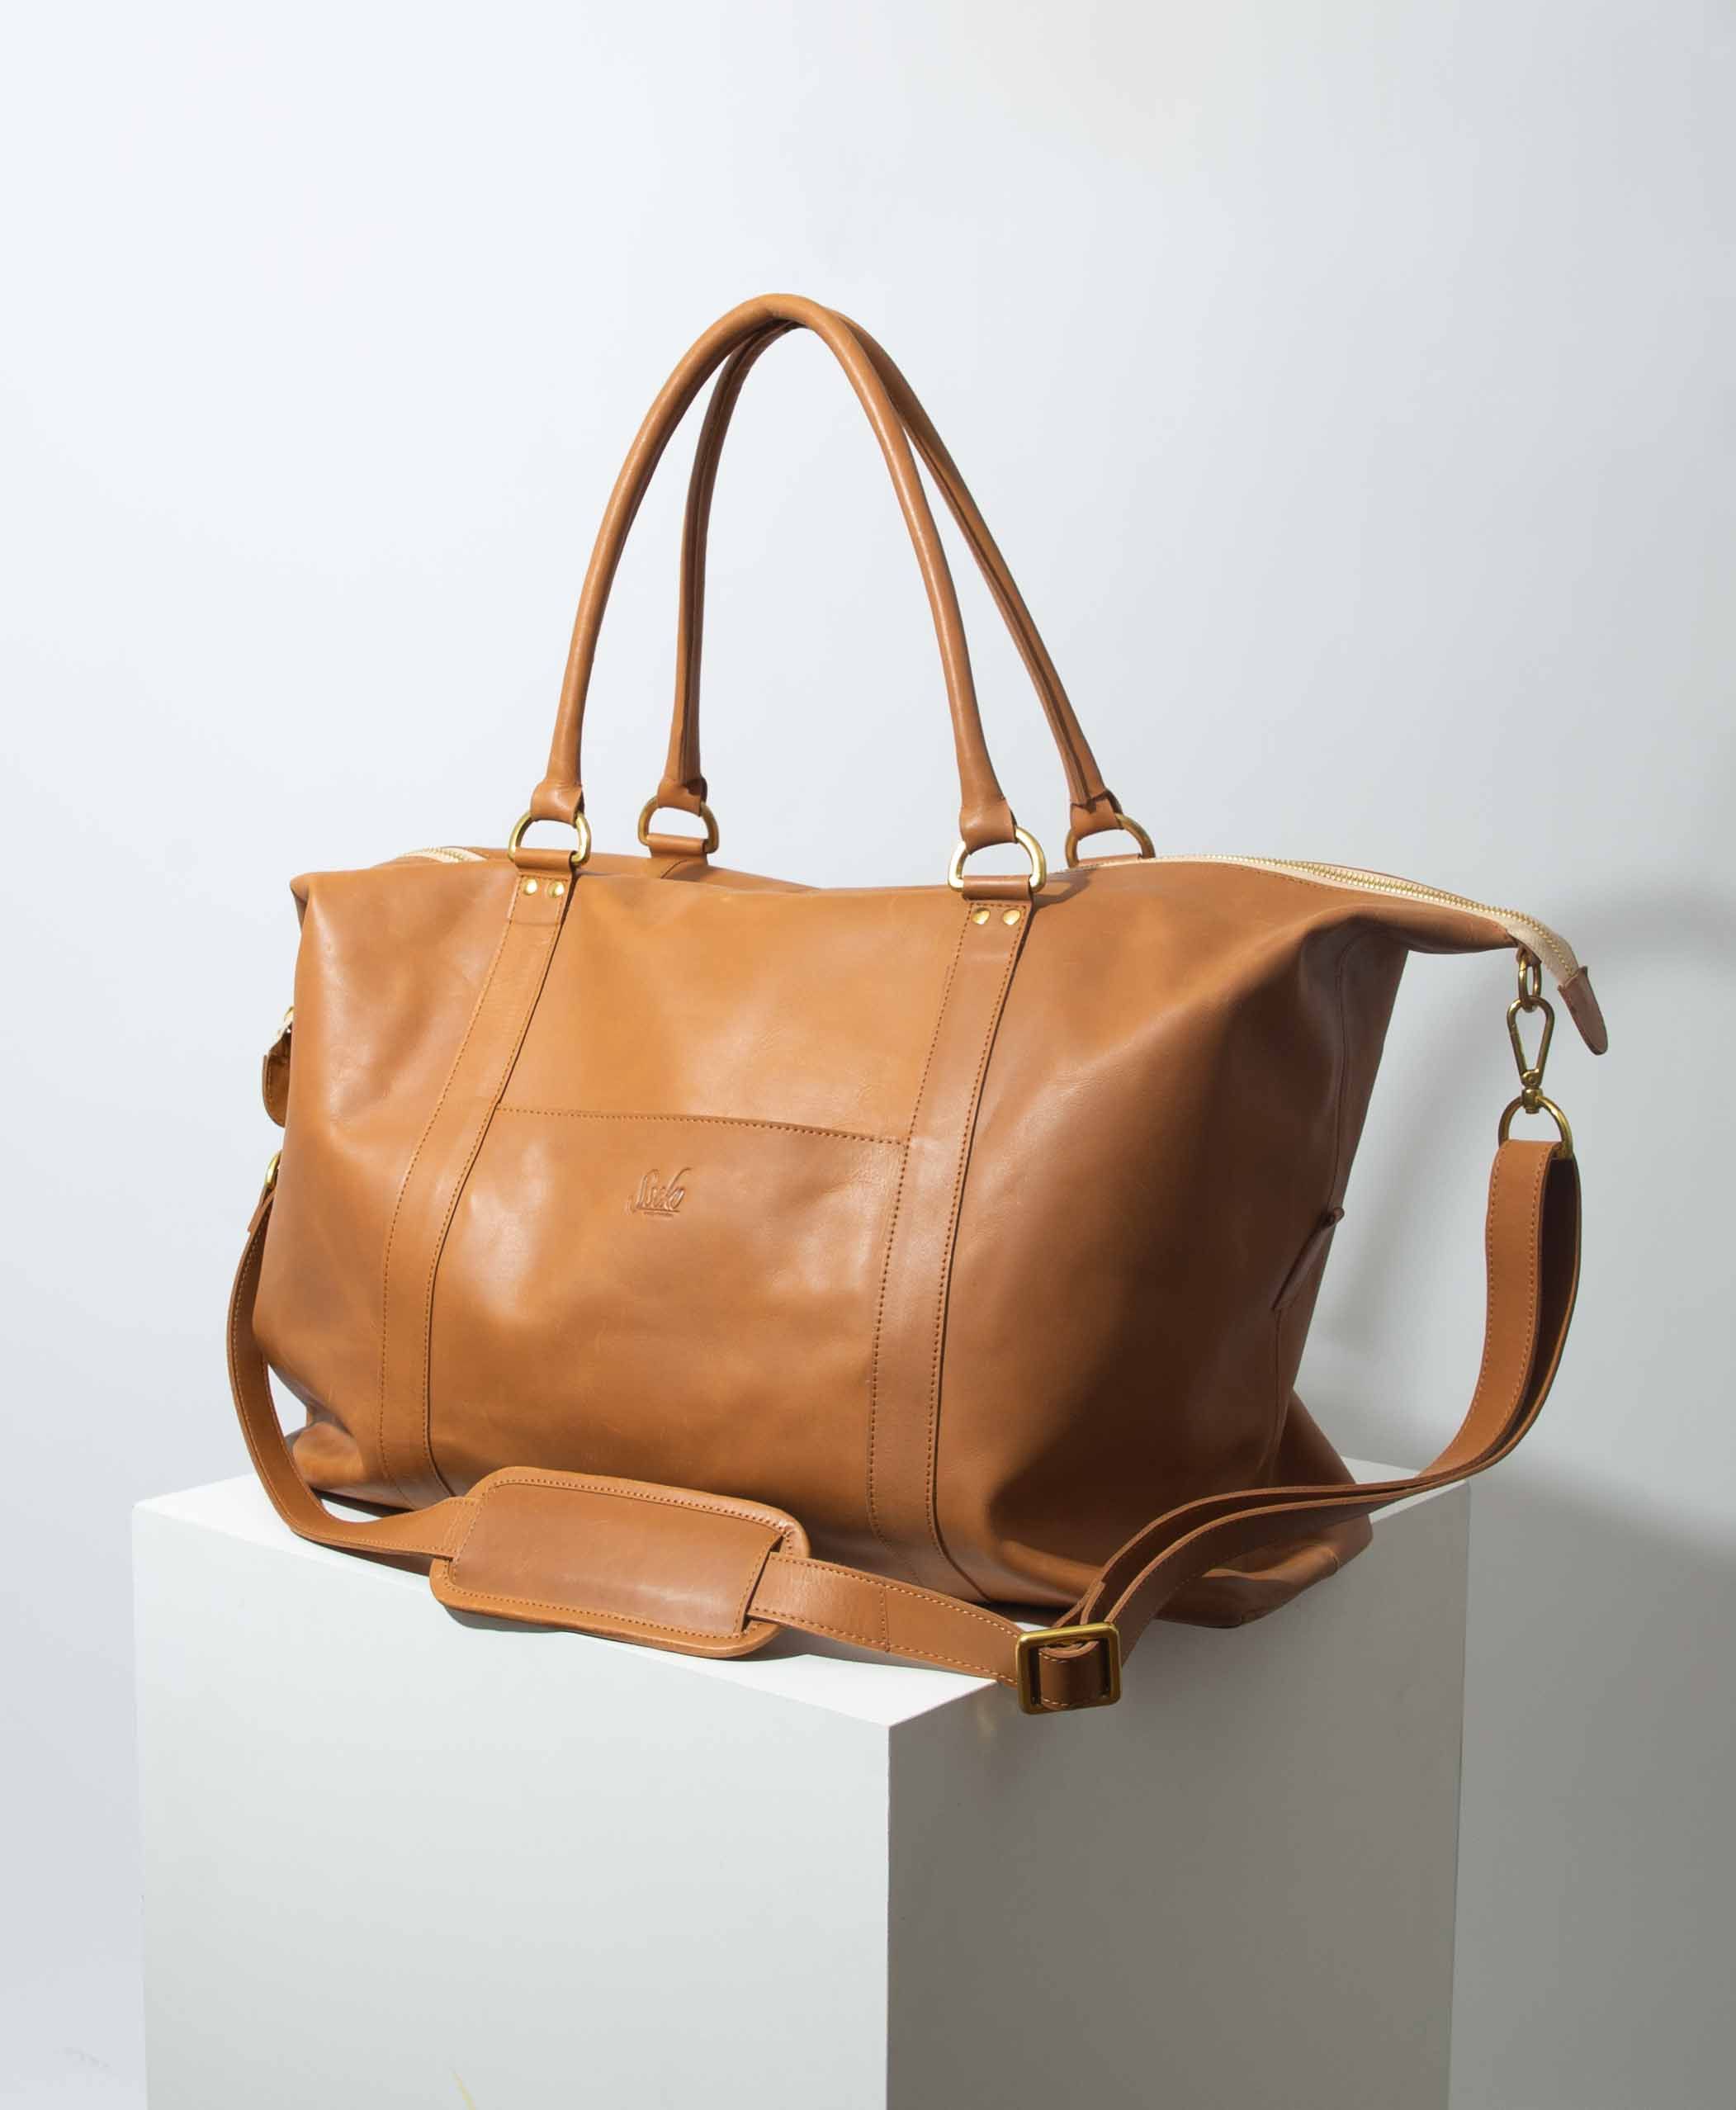 Carryall Travel Bag, Caramel | Noonday Collection